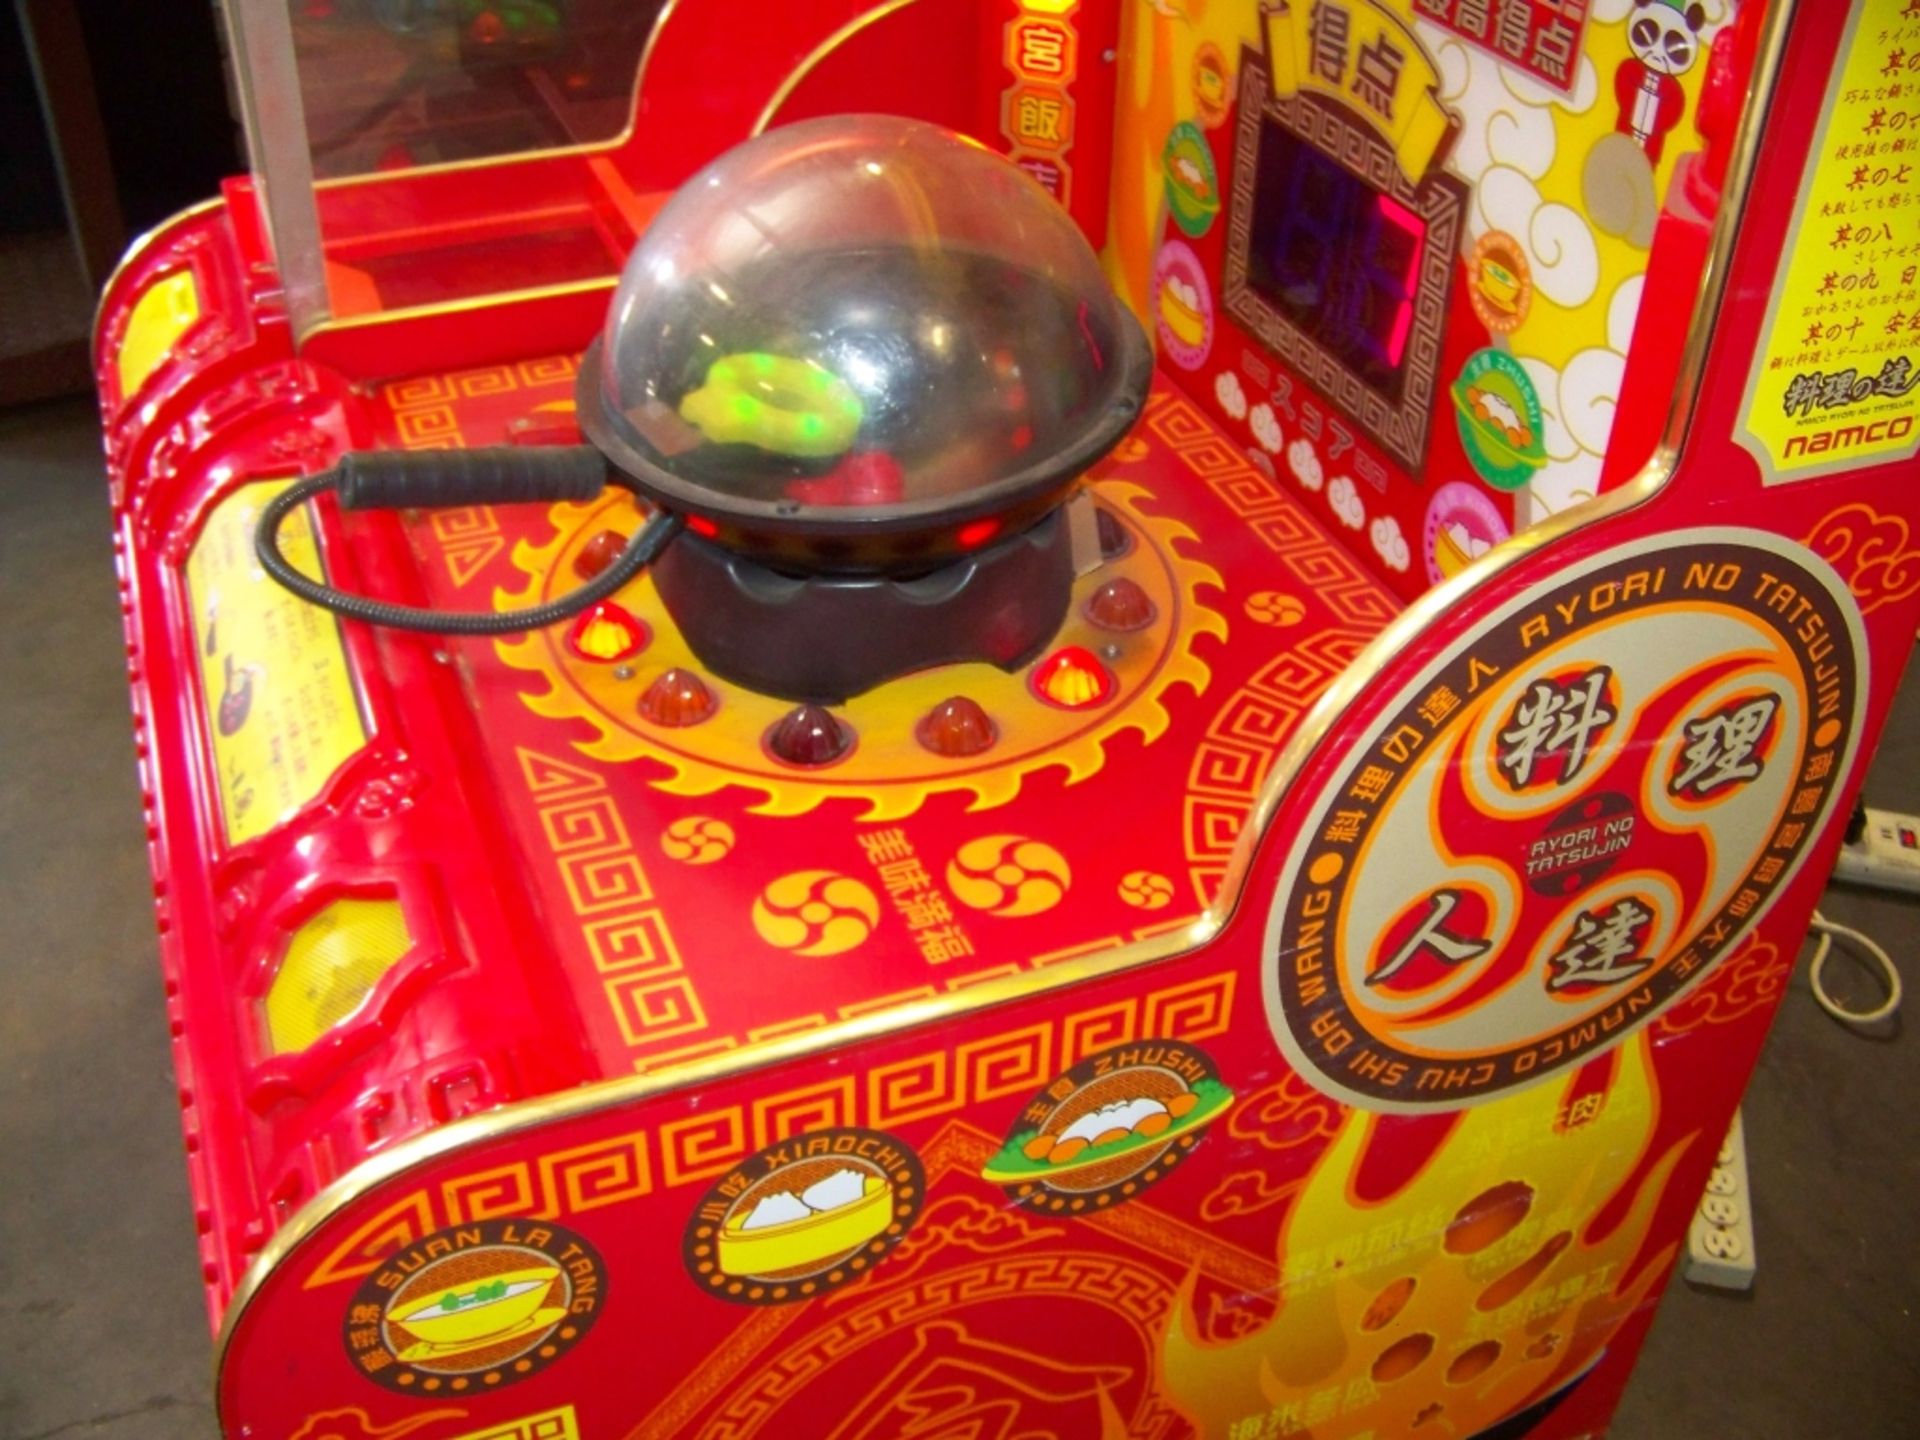 MASTER CHEF PRIZE REDEMPTION ARCADE GAME NAMCO Item is in used condition. Evidence of wear and - Image 2 of 8